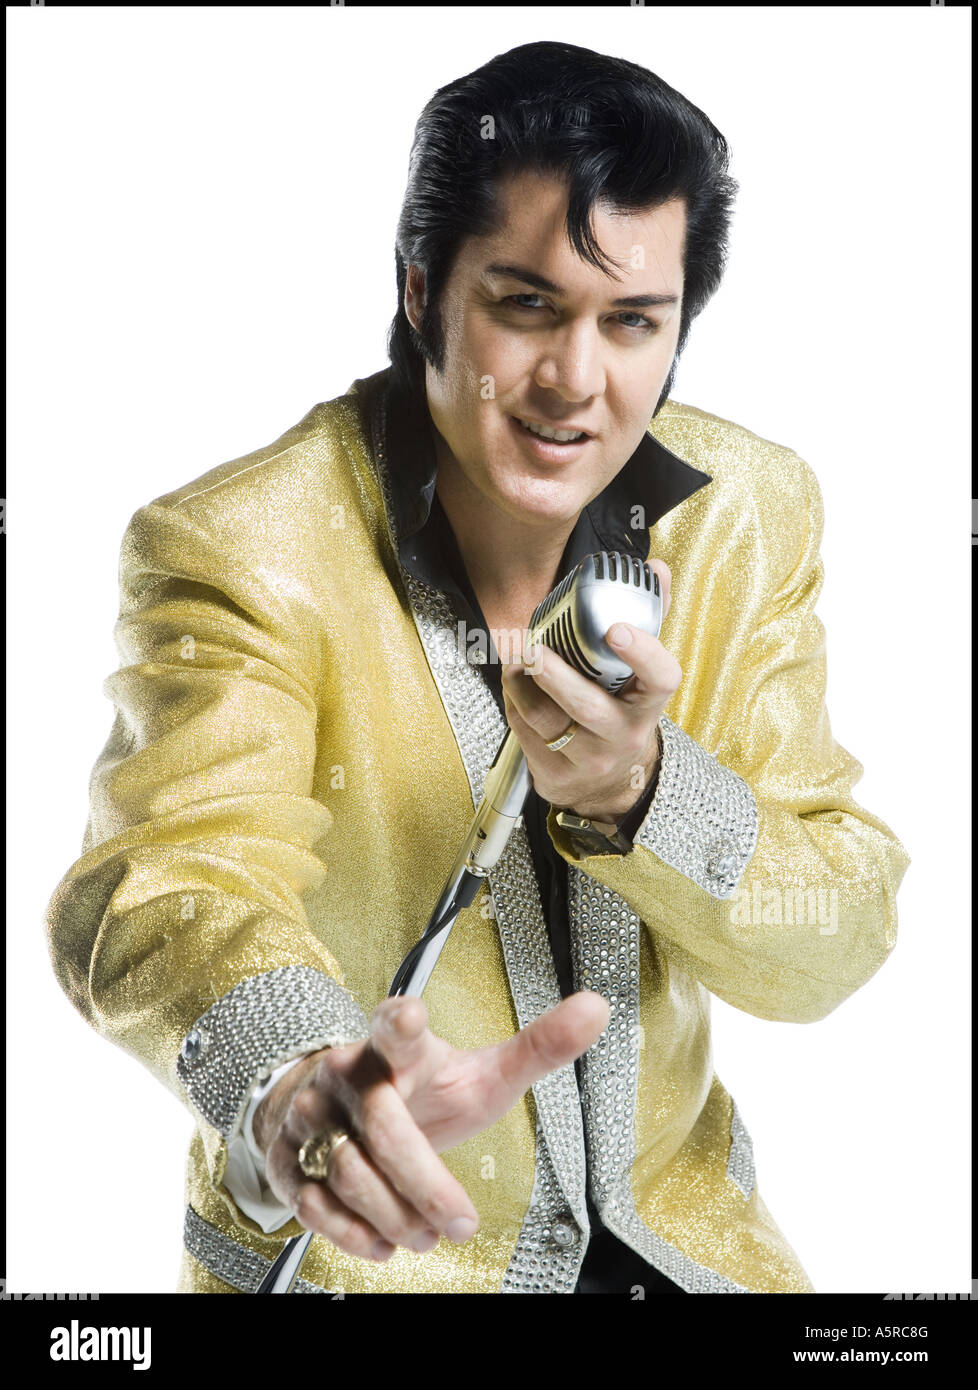 Portrait of an Elvis impersonator singing into a microphone Stock Photo